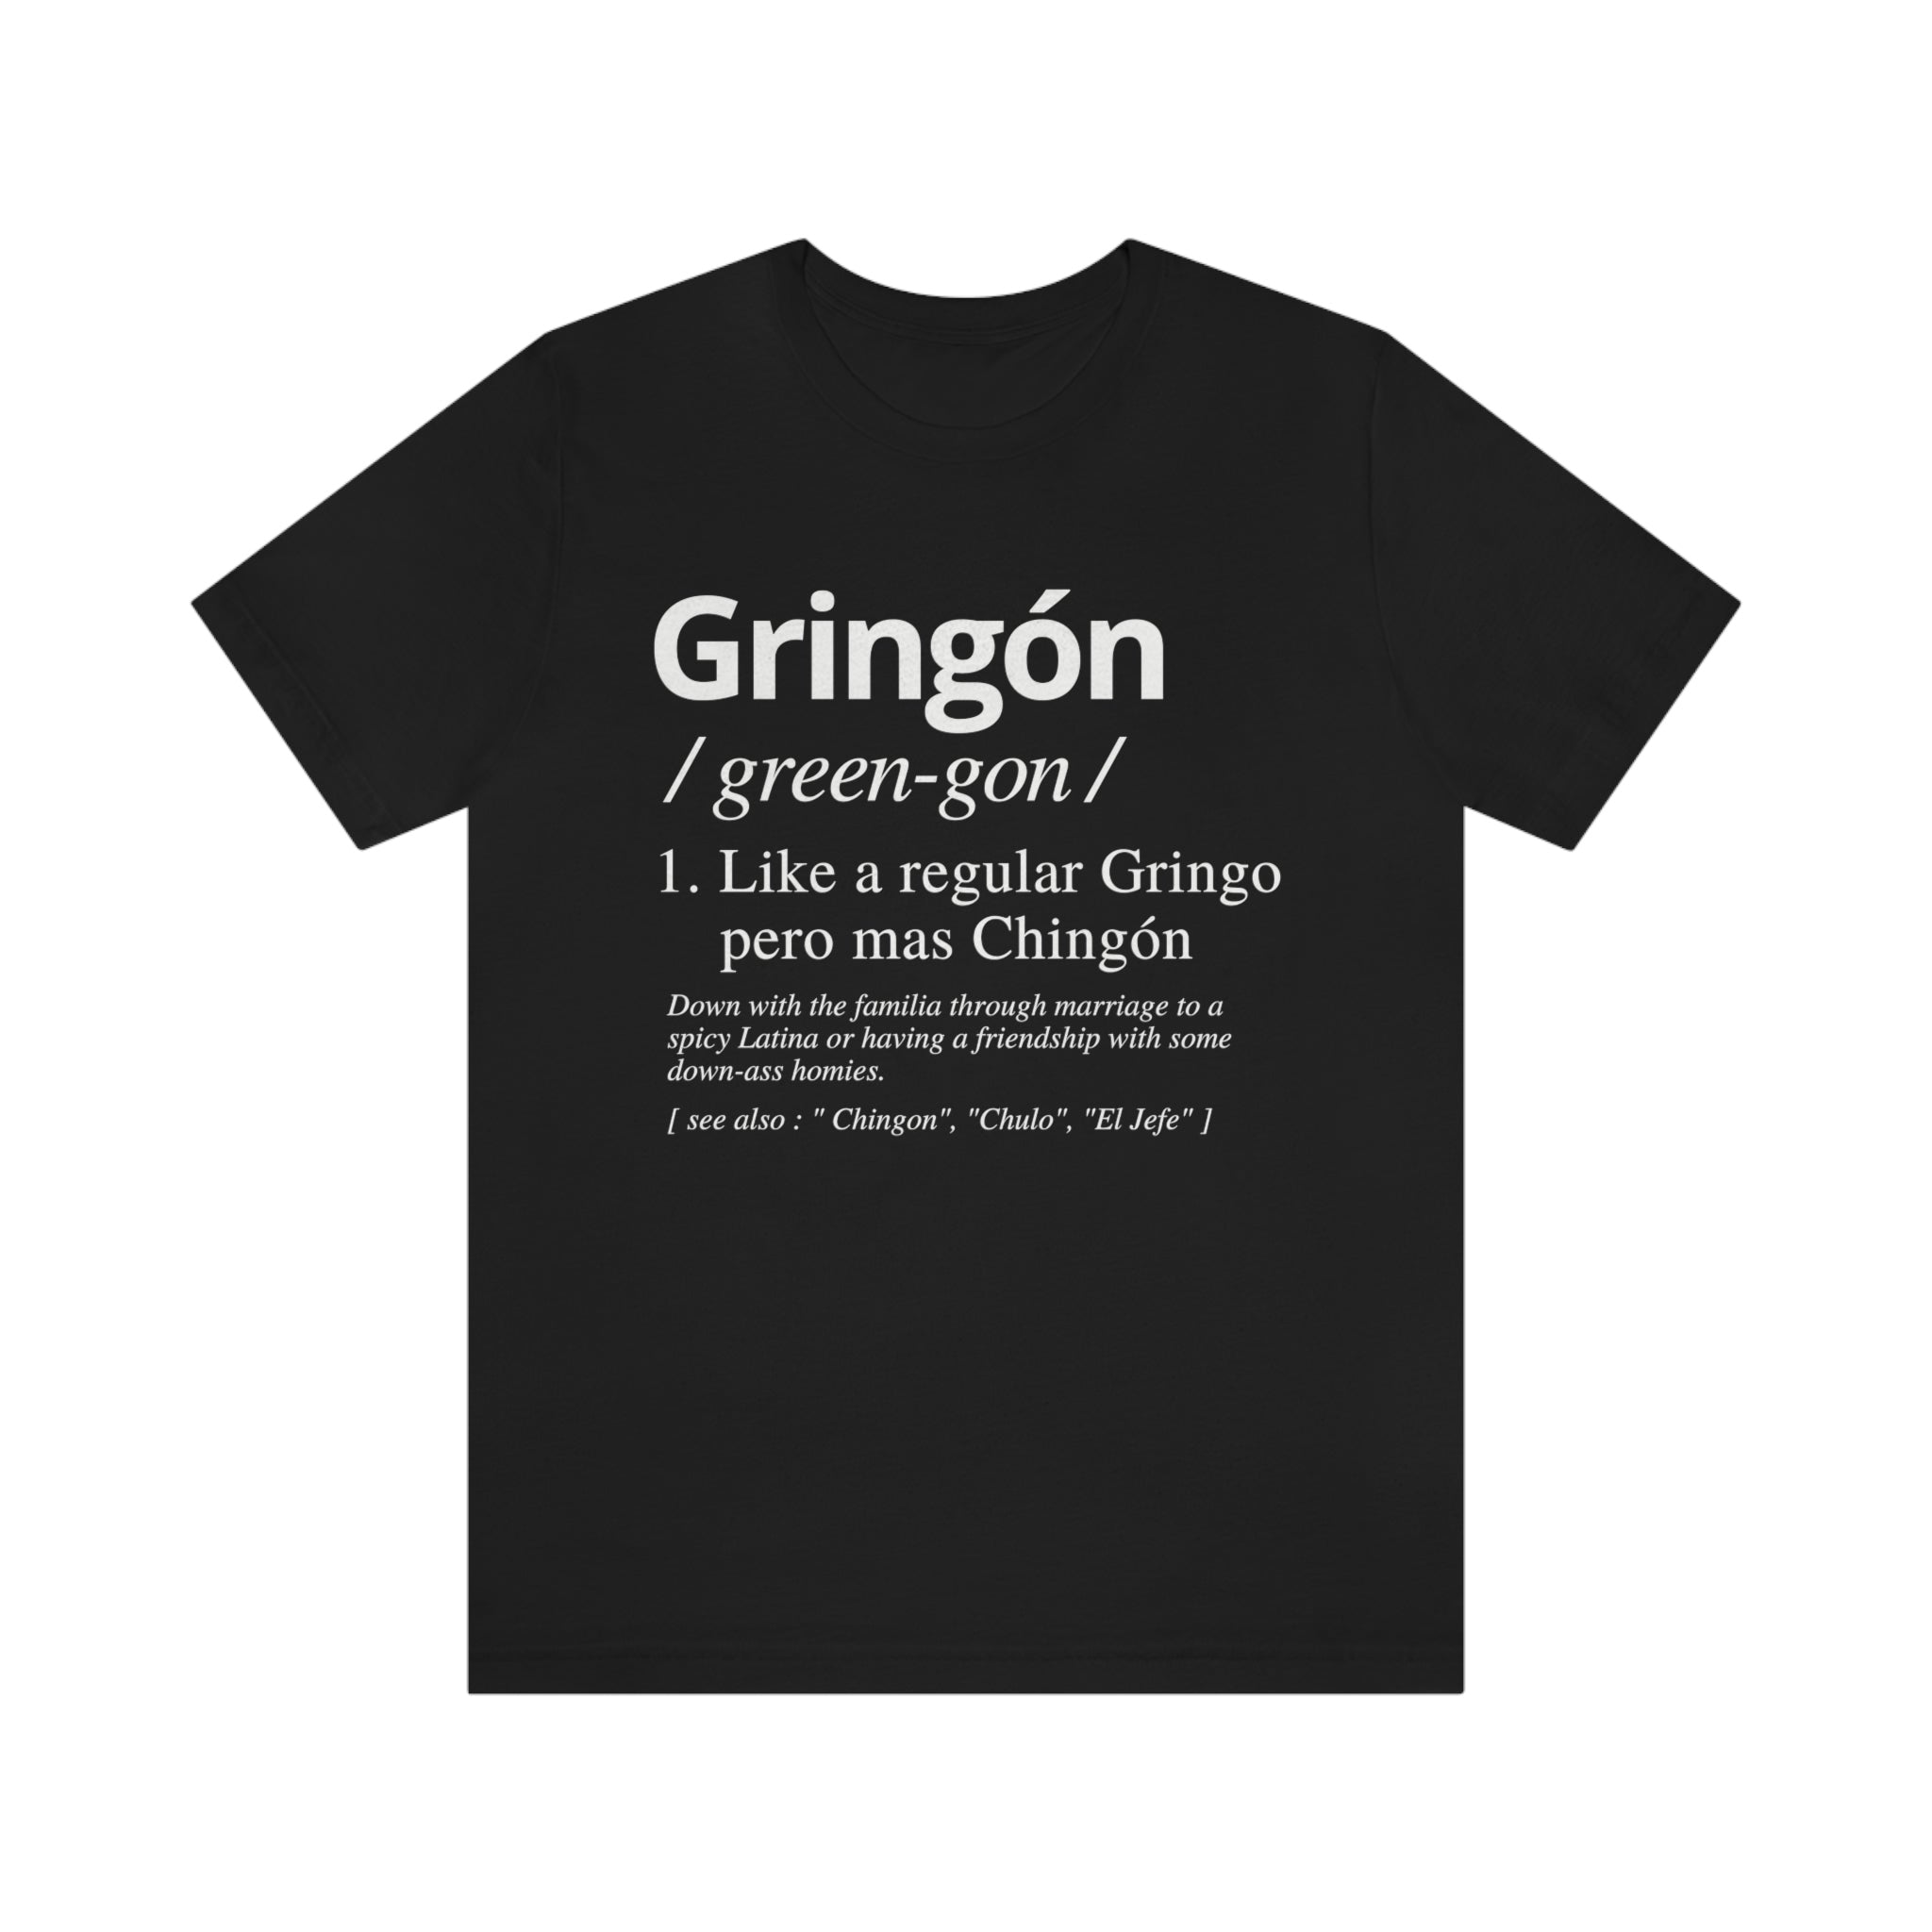 Black t-shirt for men displaying a dictionary-style graphic defining "Gringon" as a gringo that is cooler through relationships with Latinos